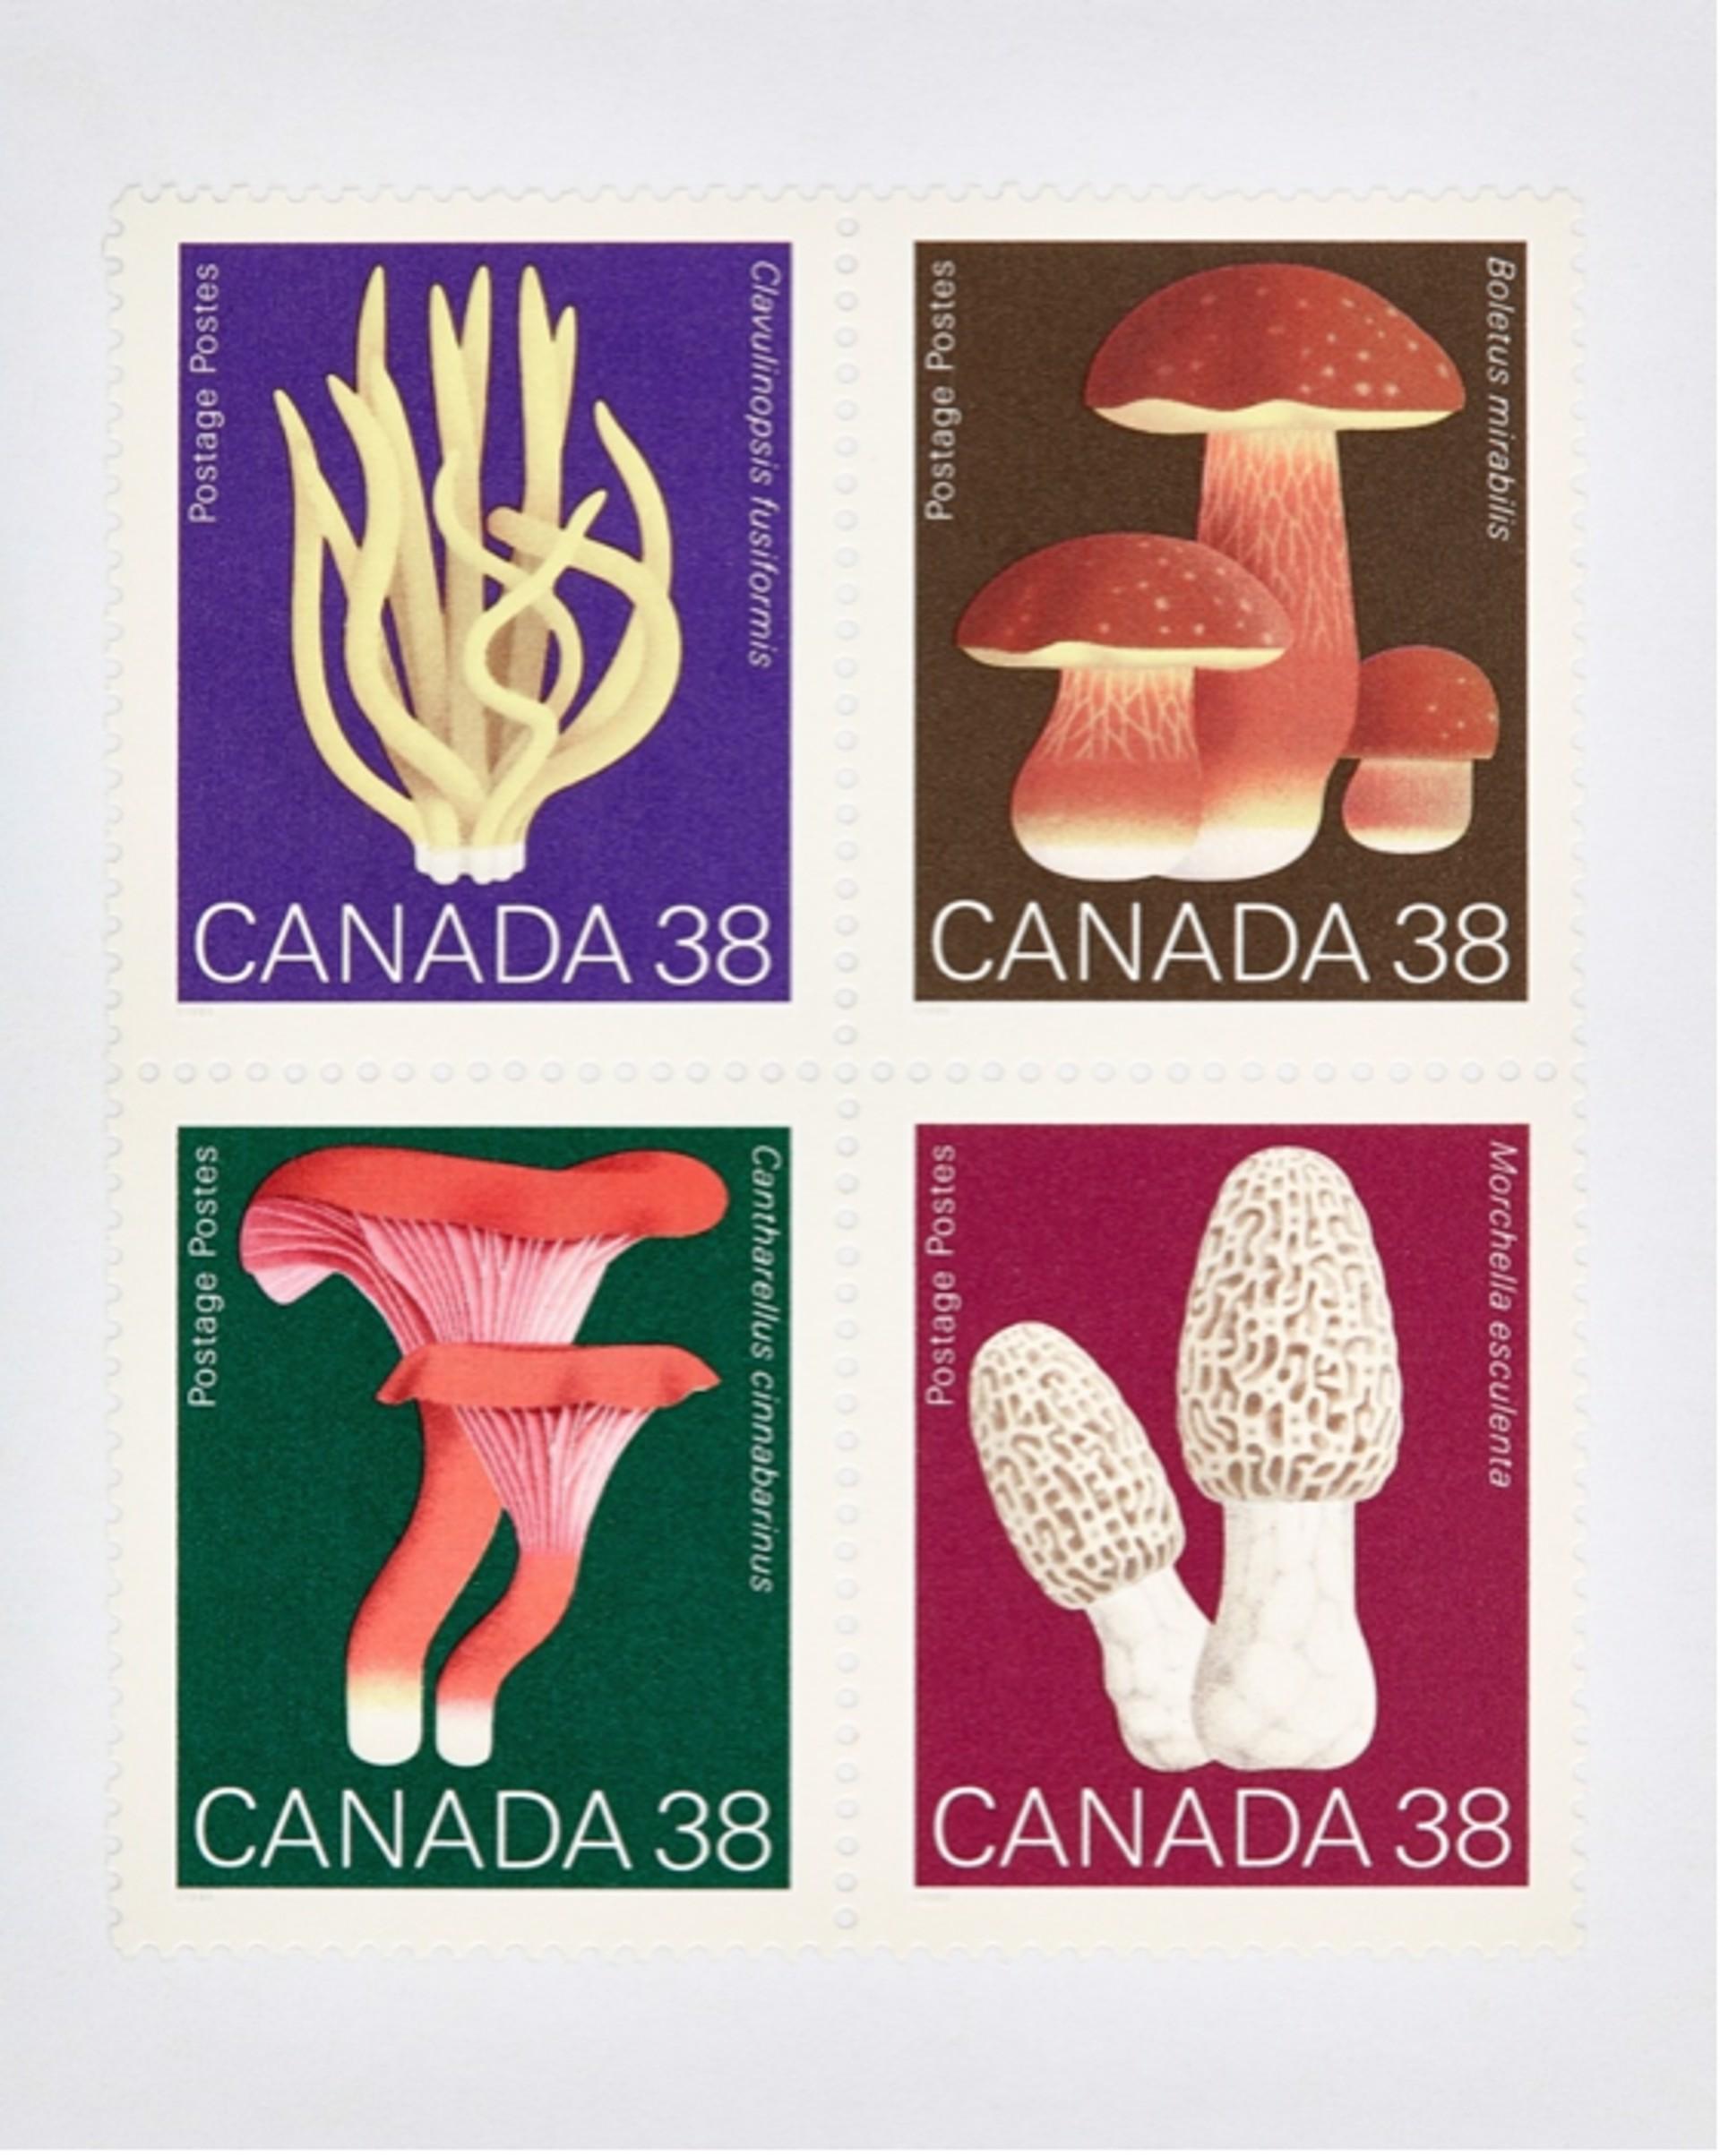 Peter Andrew Lusztyk - Canada Mushroom, Photography 2021, Printed After